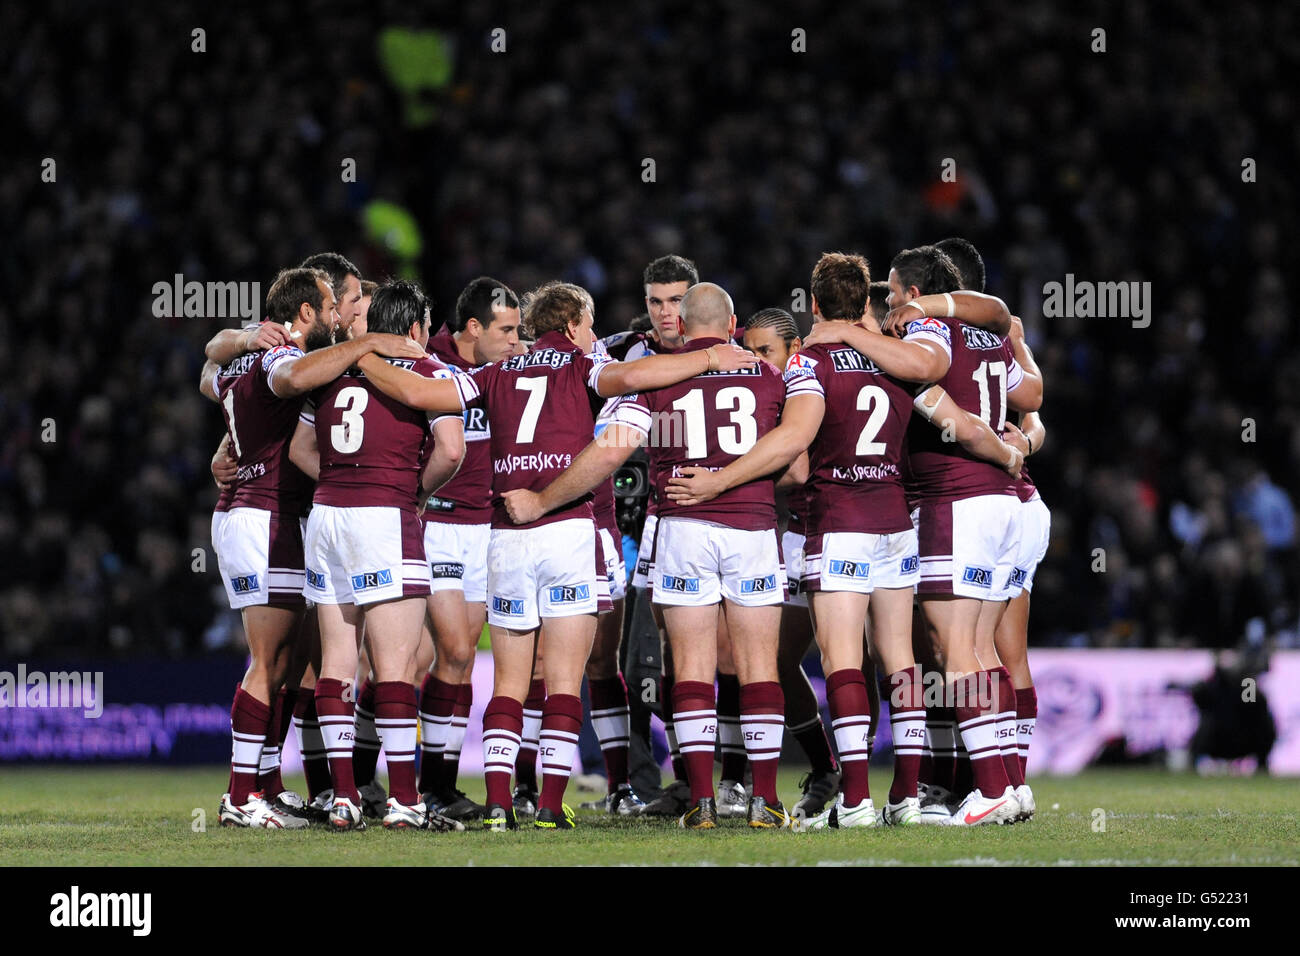 The Manly Sea Eagles team huddle together before the game Stock Photo